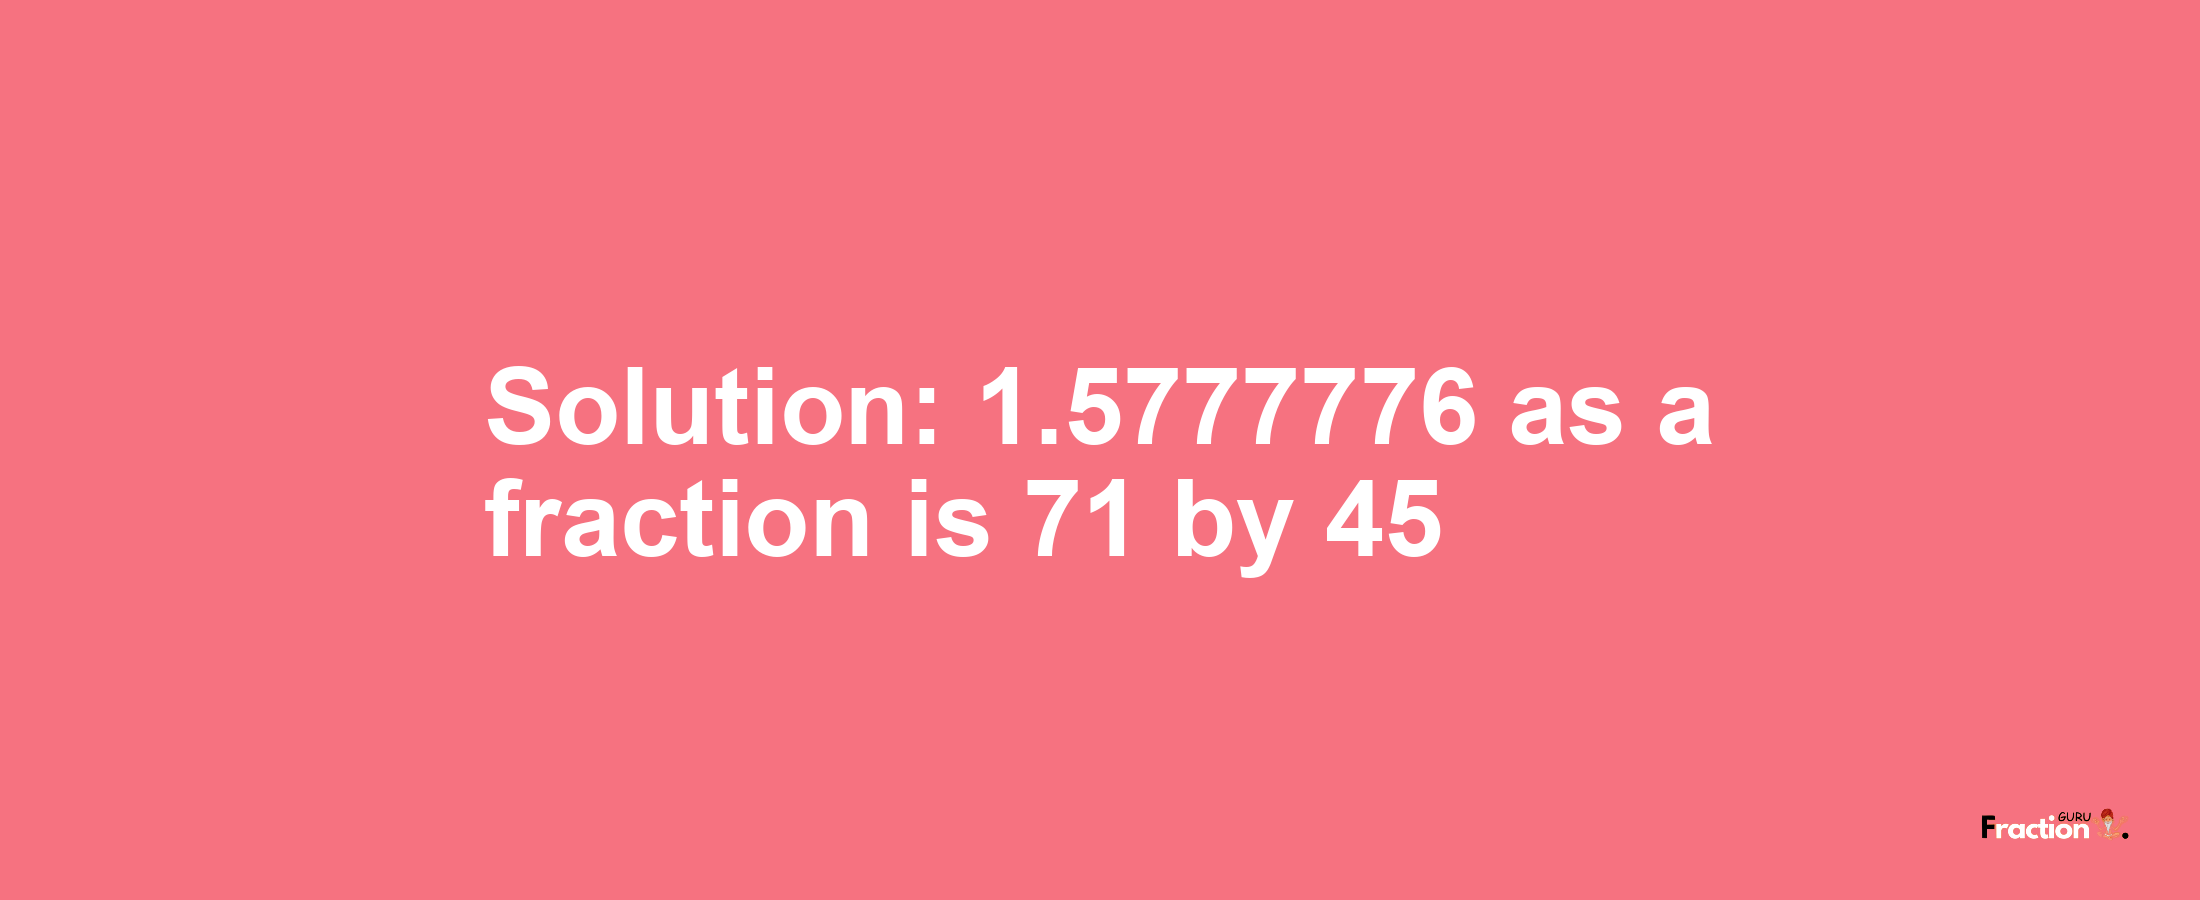 Solution:1.5777776 as a fraction is 71/45